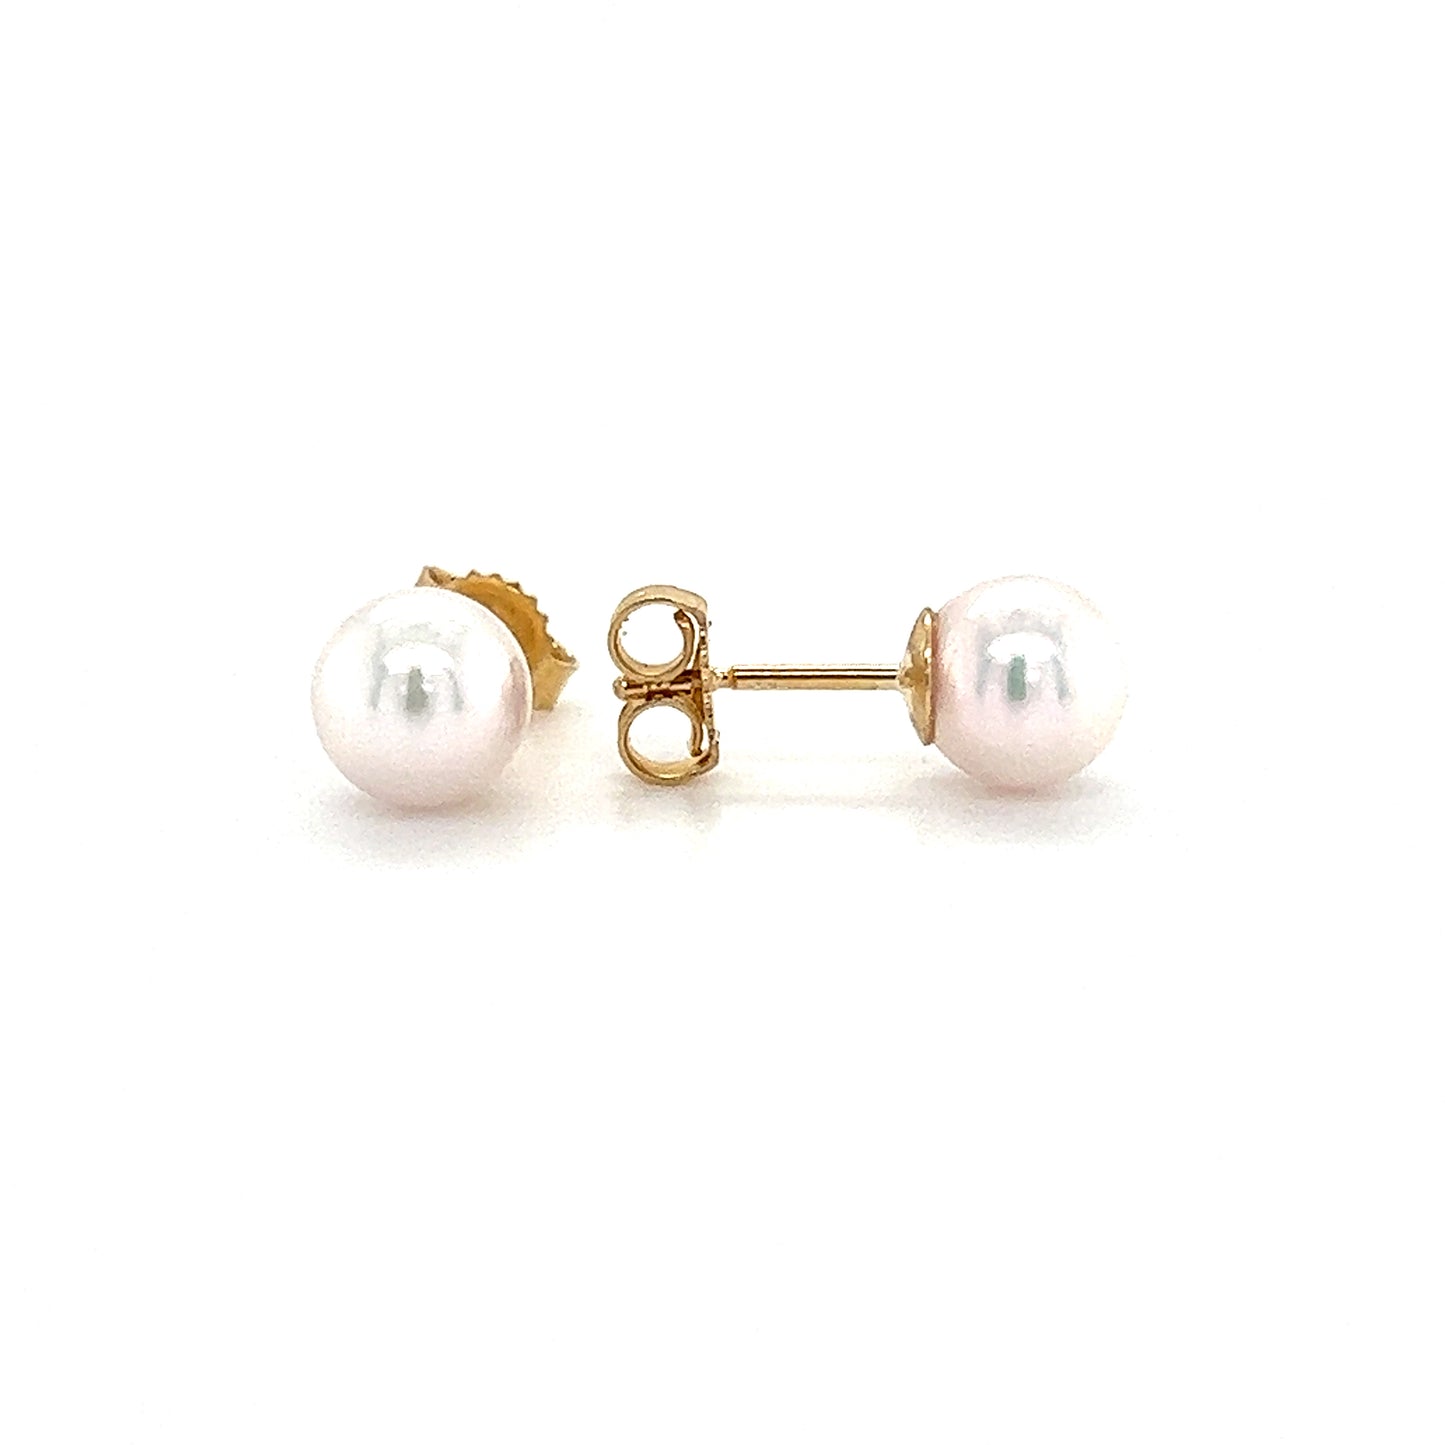 Pearl 6mm Stud Earrings in 14K Yellow Gold Front and Side View